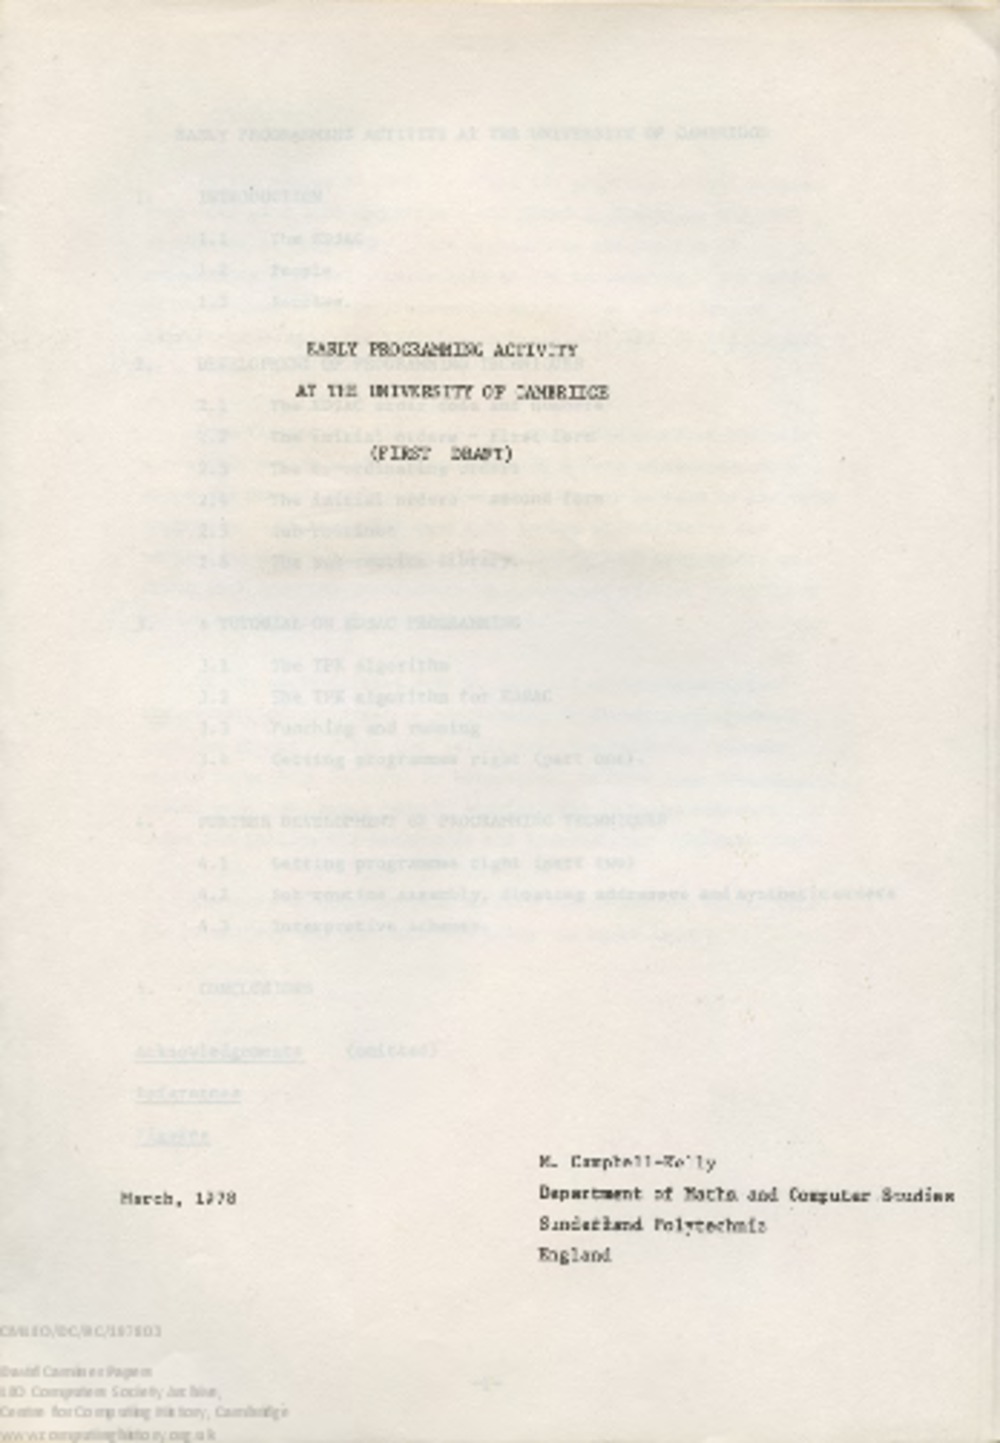 Article: 58515 Campbell-Kelly, Early Programming Activity at the University of Cambridge (Mar 1978)